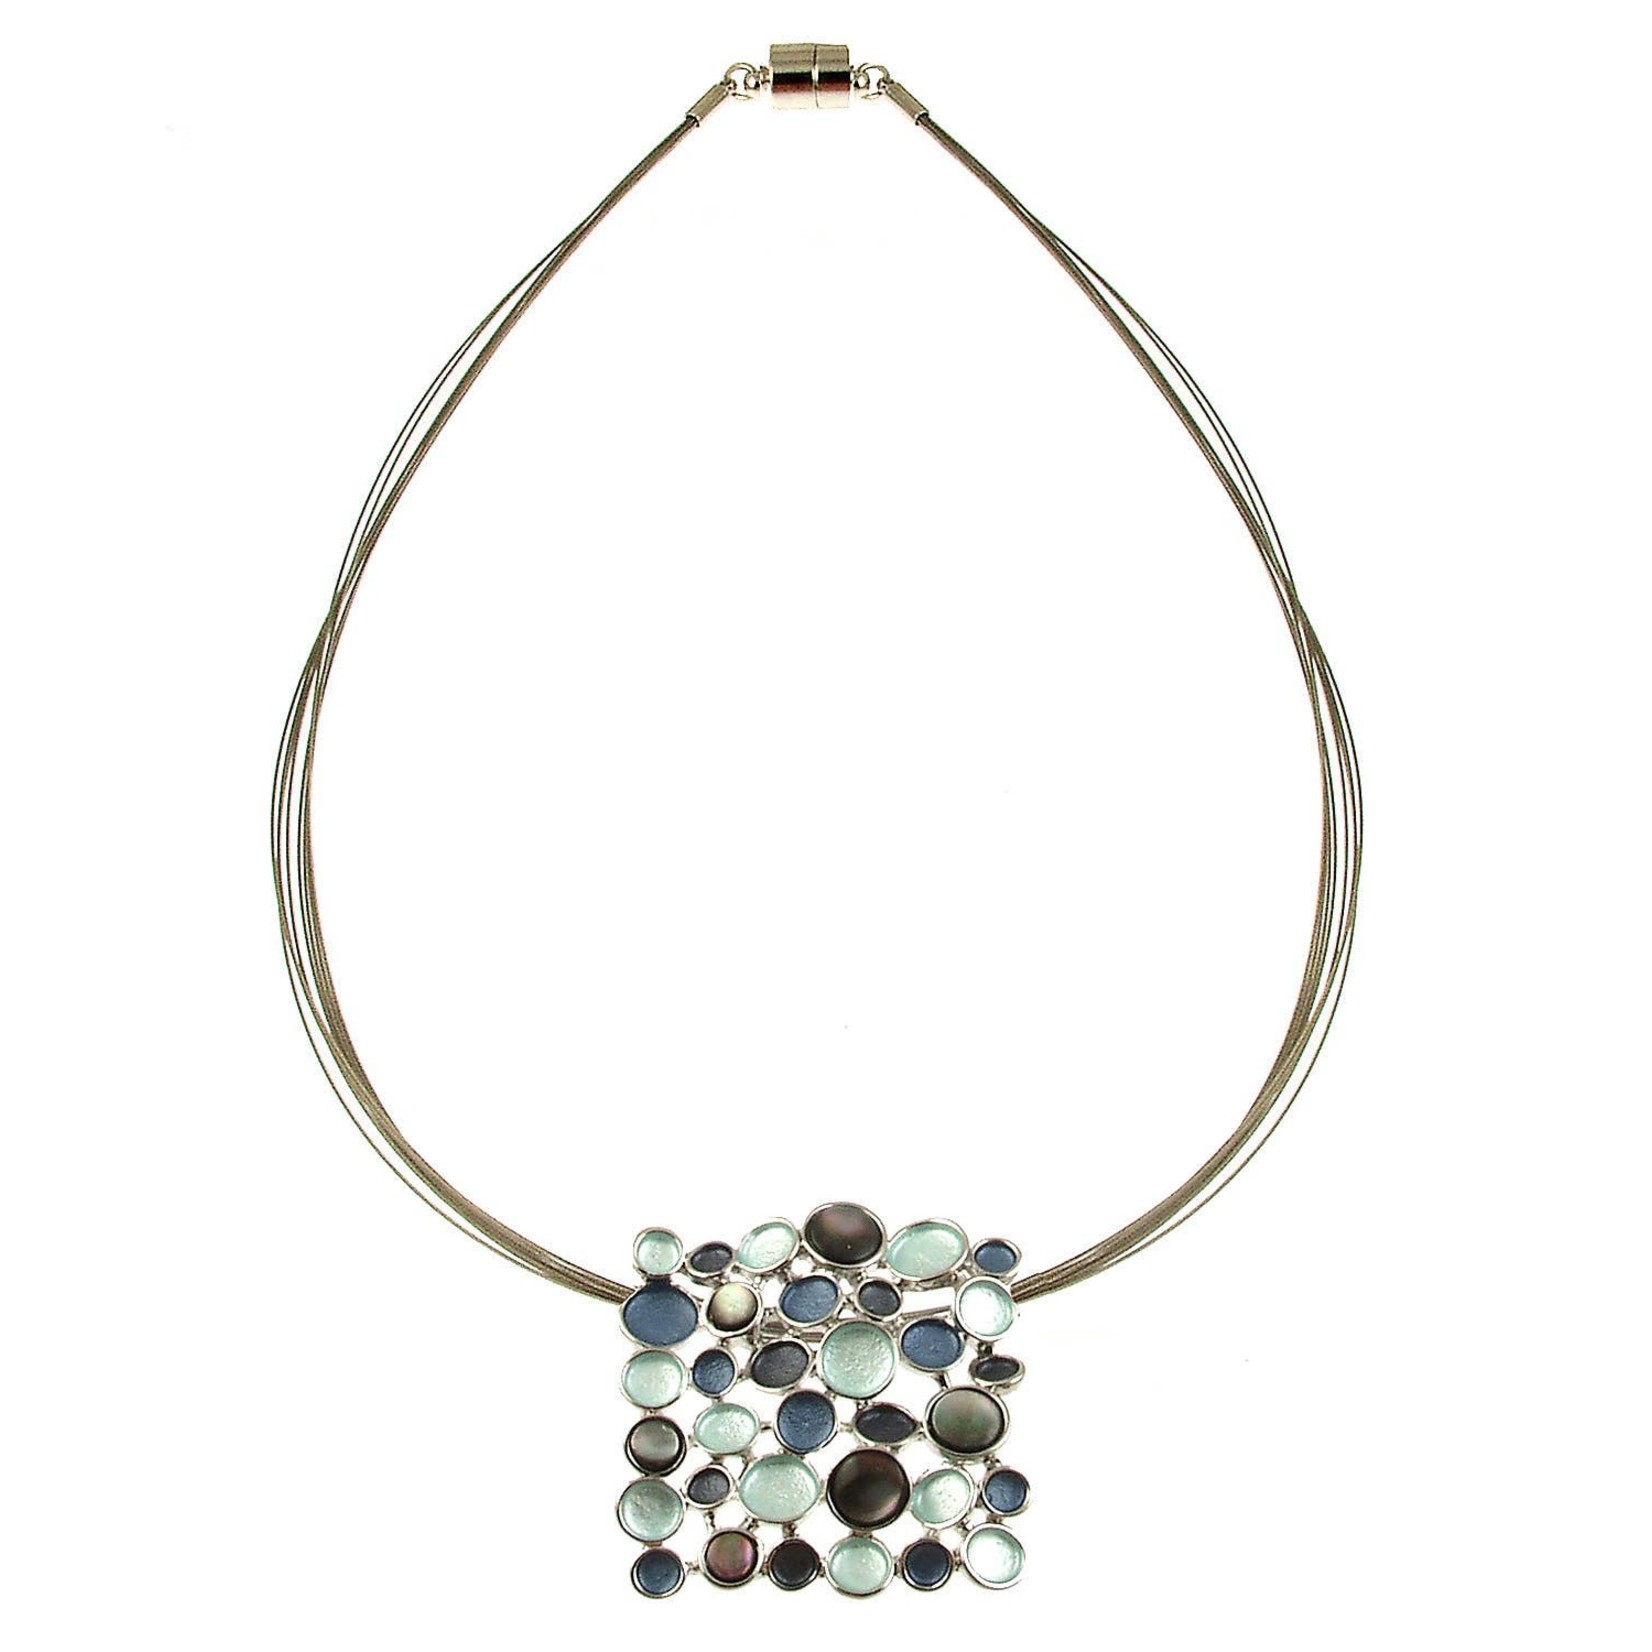 Magnetic Closure Necklace Combi Colors 2.5 in - Green Blue - #3669-2